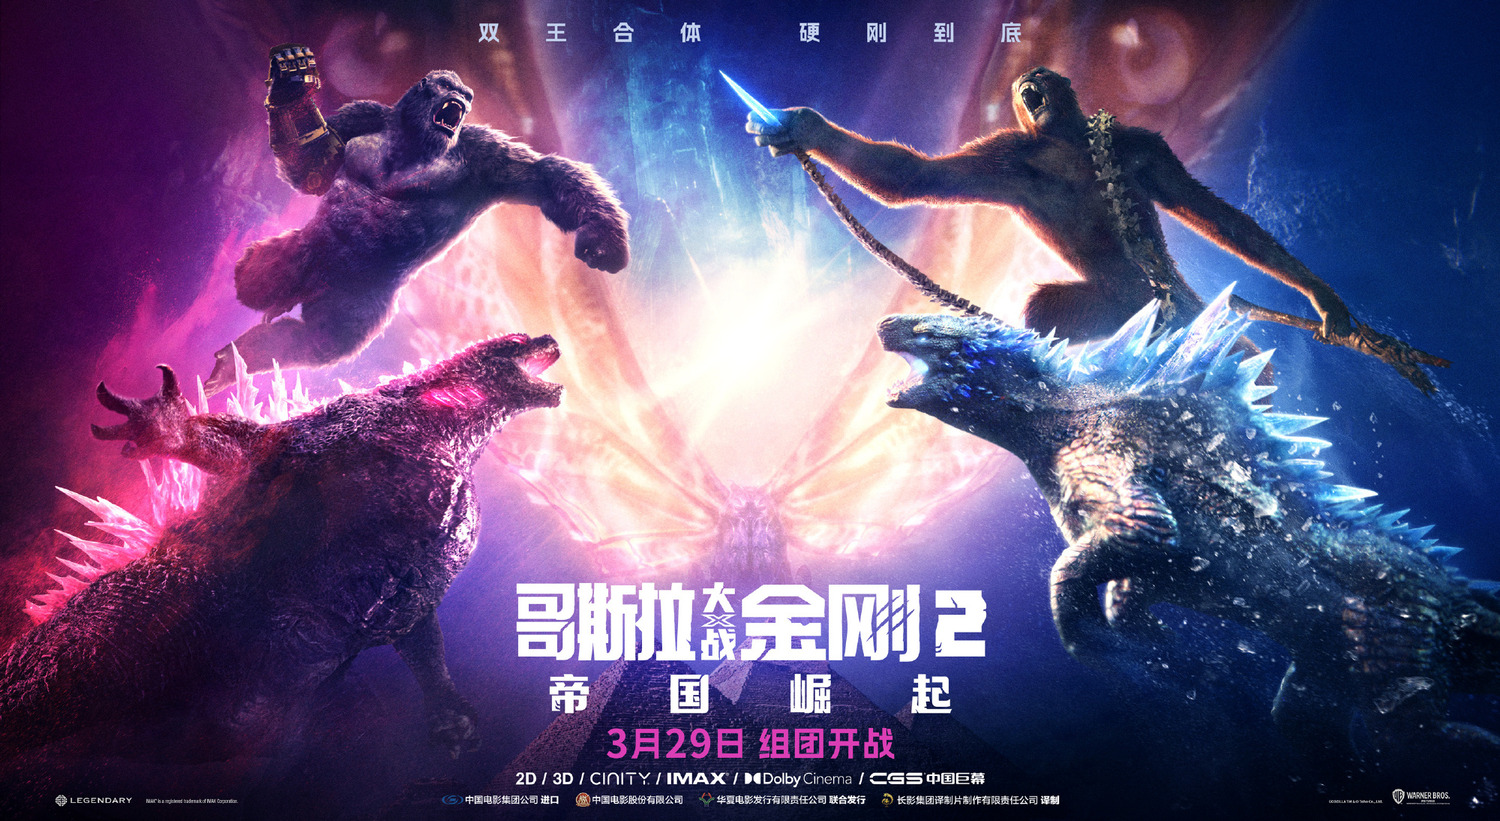 Extra Large Movie Poster Image for Godzilla x Kong: The New Empire (#15 of 19)